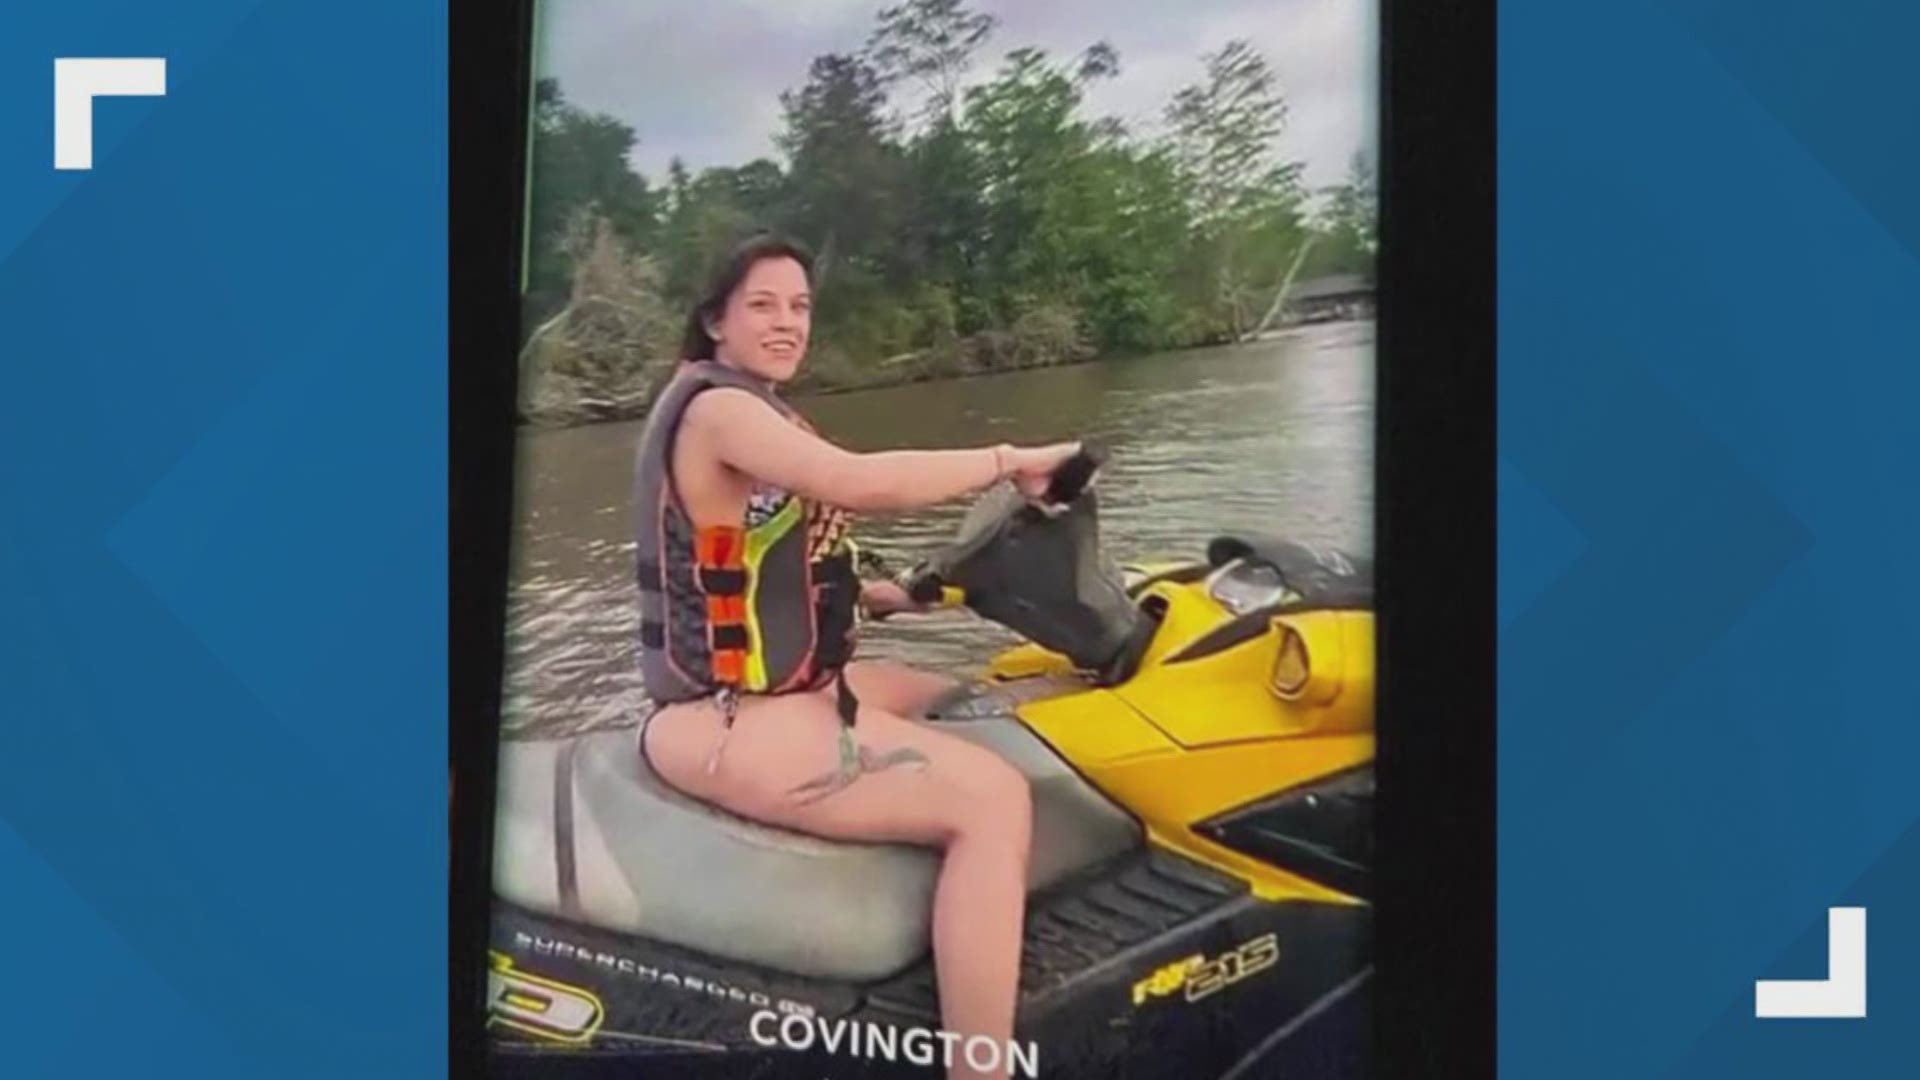 Officials have located a woman that went missing after riding a jet ski in the river Friday police said she is at a hospital and in critical condition.